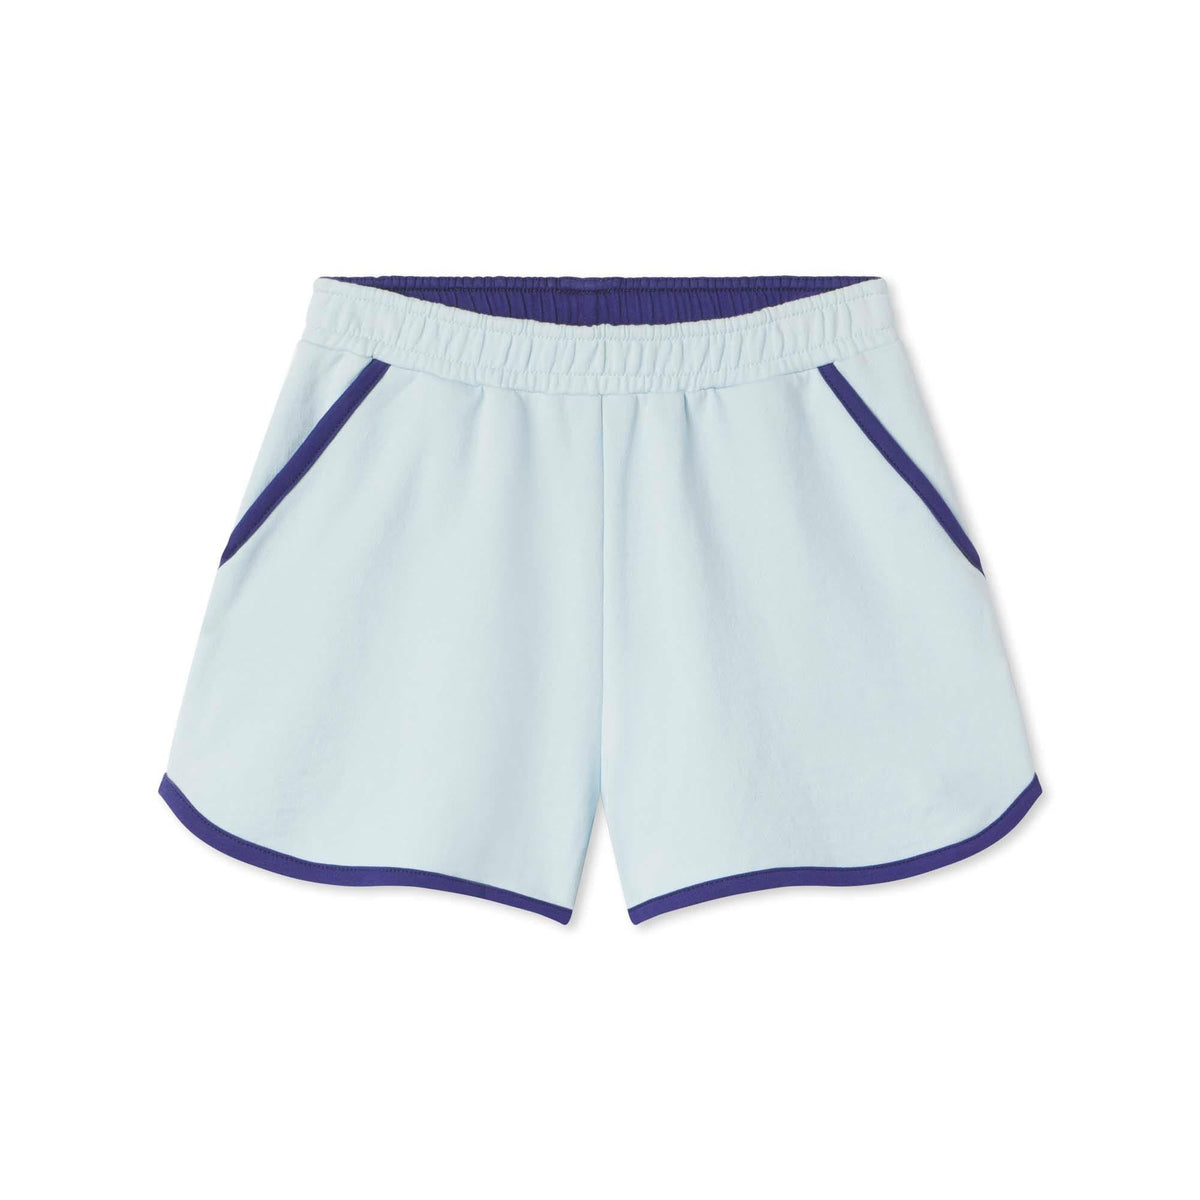 Classic and Preppy Fiona Knit Short Sunwashed, Nantucket Breeze French Terry-Bottoms-Nantucket Breeze-XS (2-3T)-CPC - Classic Prep Childrenswear